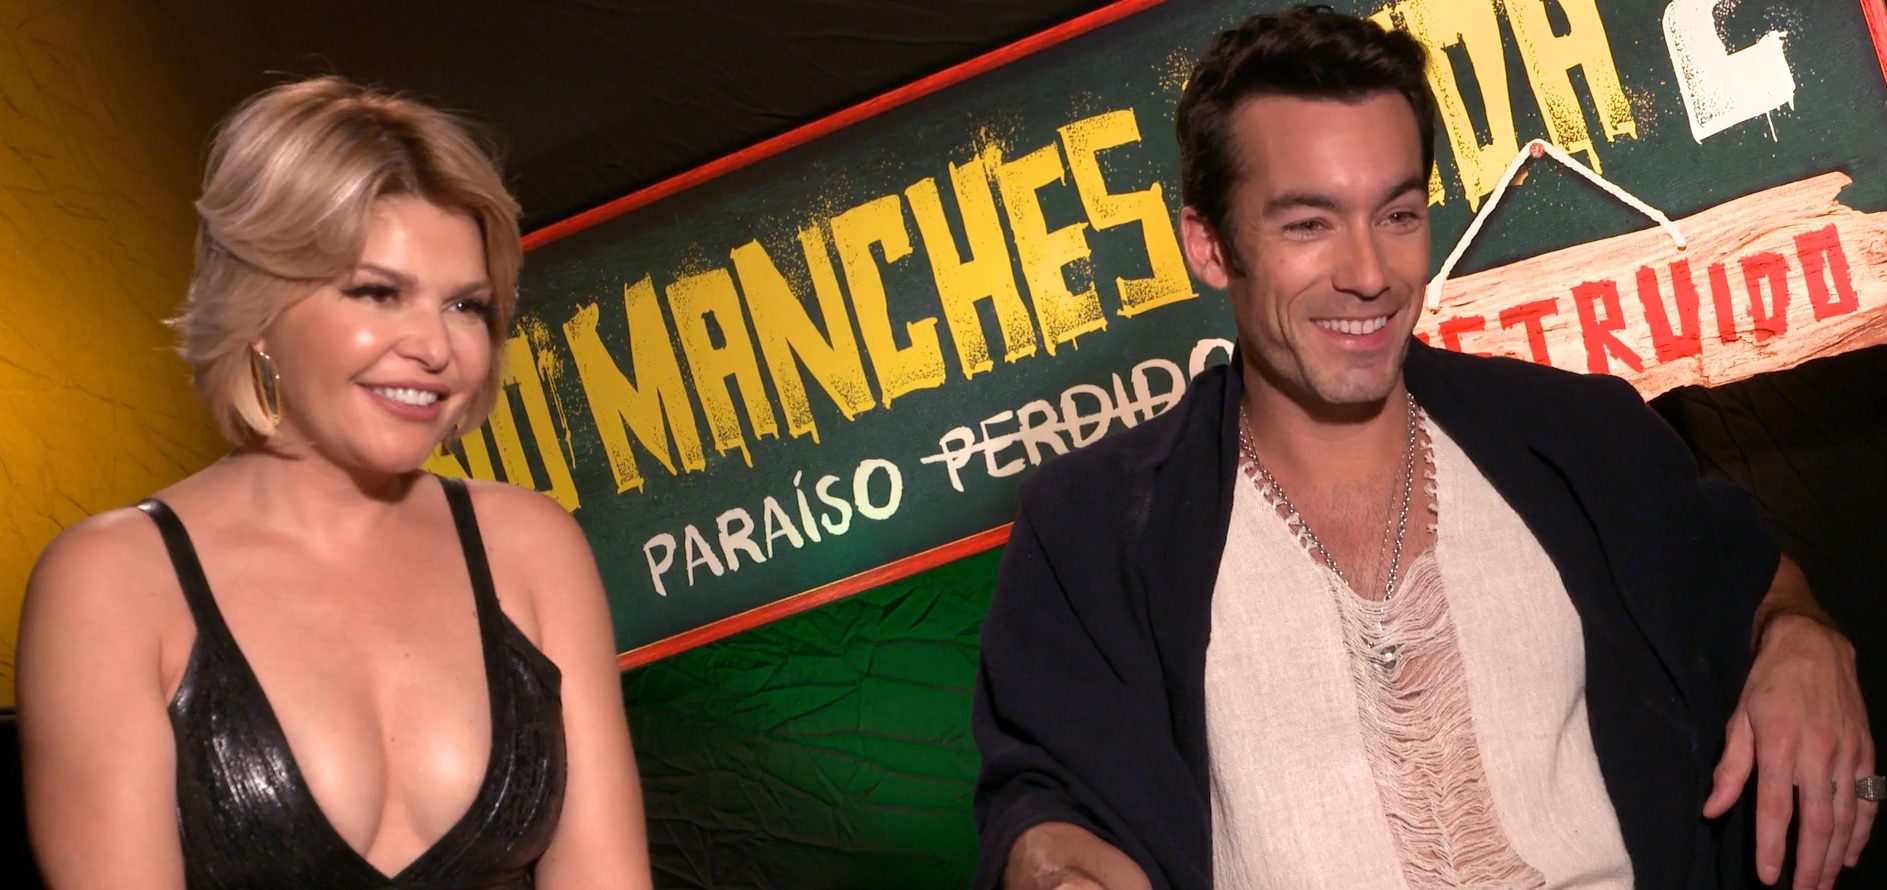 No Manches Frida 2: Aaron Diaz and Itati Cantoral on Being Part of This Spanish Comedy [English/Spanish]